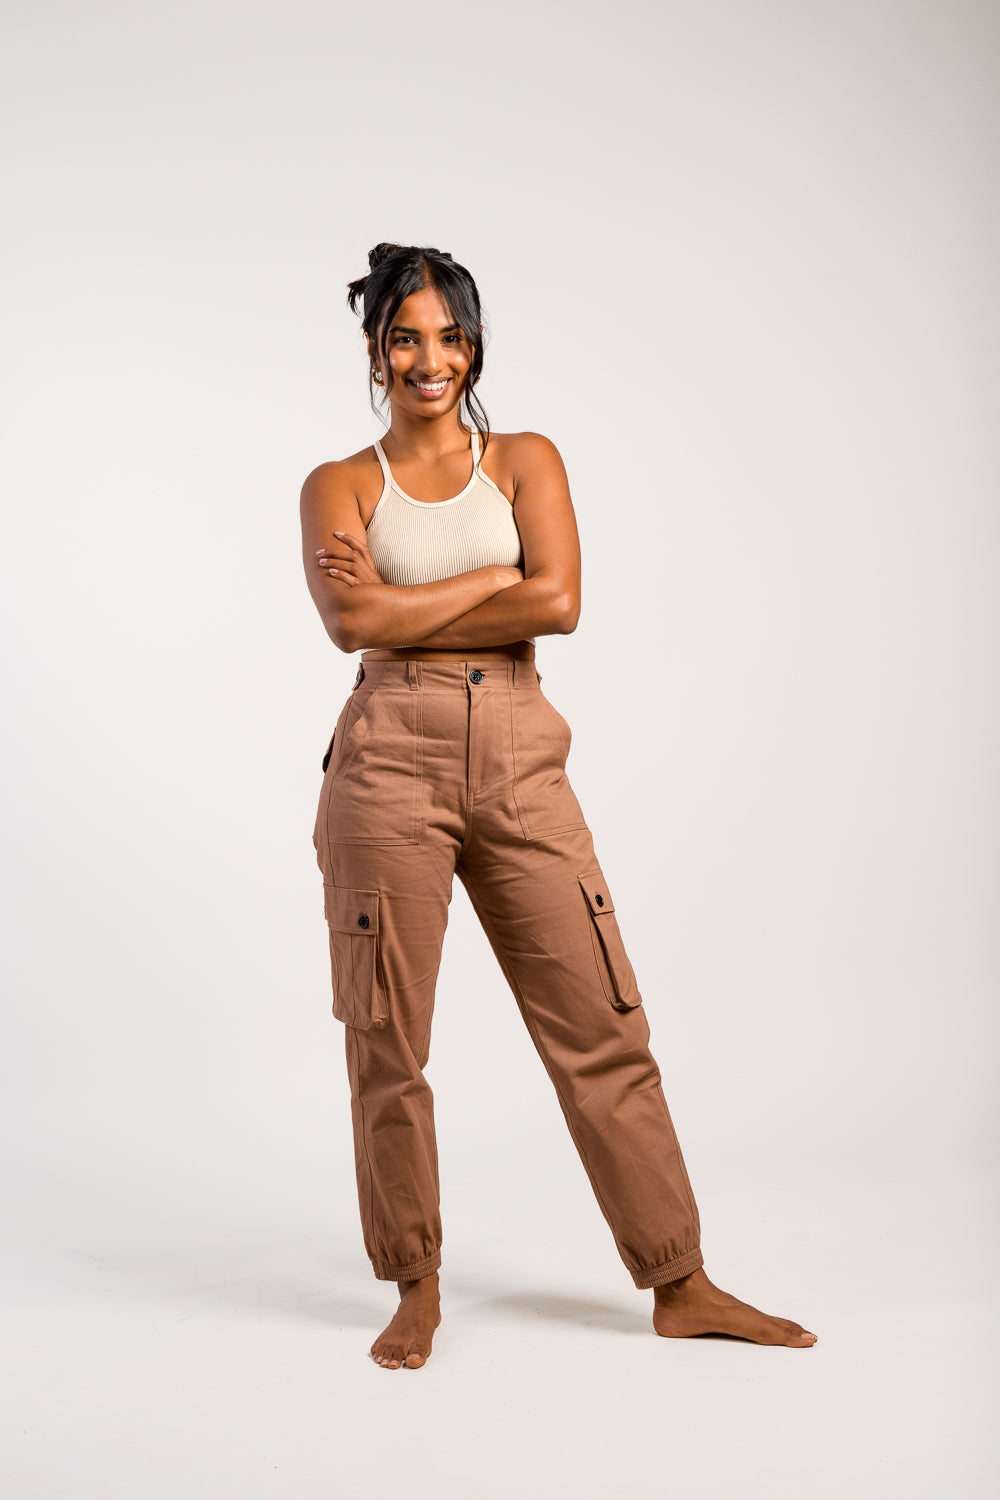 Petite Red Pocket Detail Cargo Pants  Pants for women, Red cargo pants  outfit, Red cargo pants